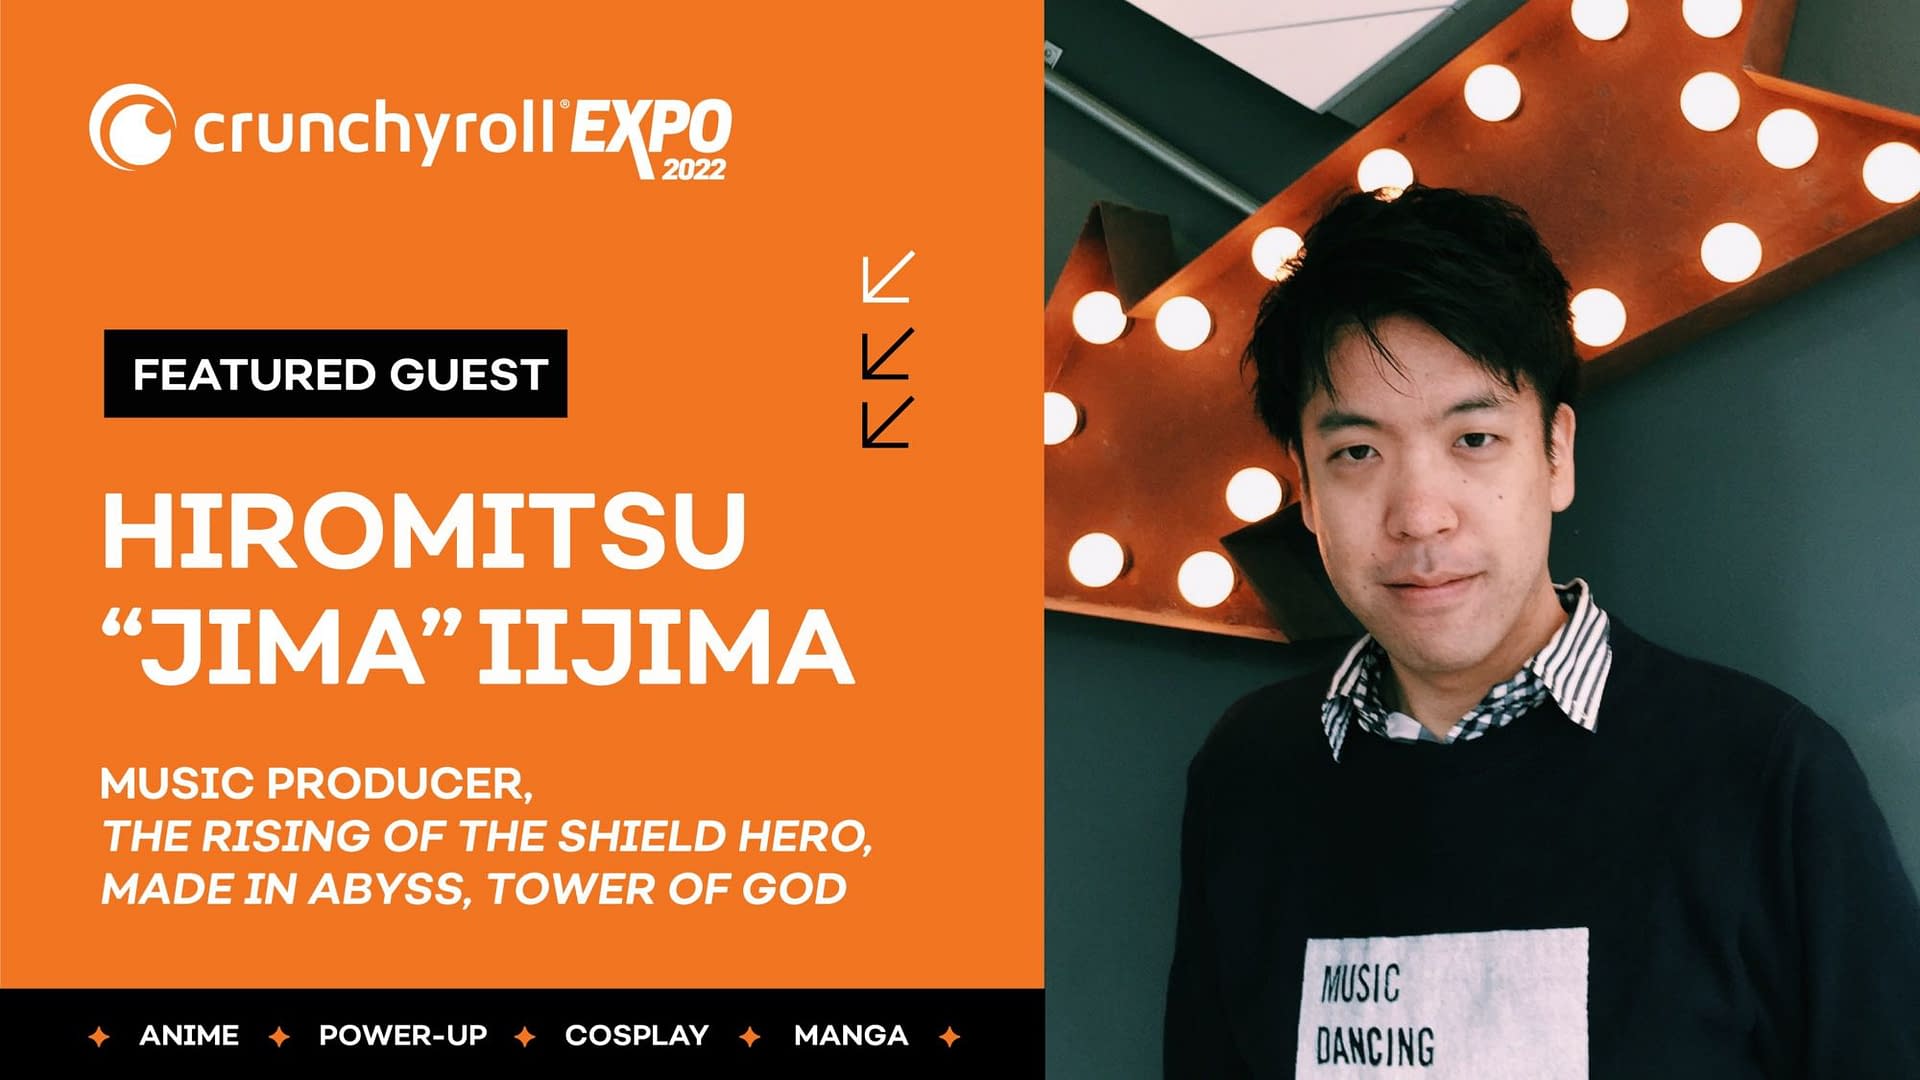 Crunchyroll Expo 2021 to Feature The Rising of the Shield Hero Stars